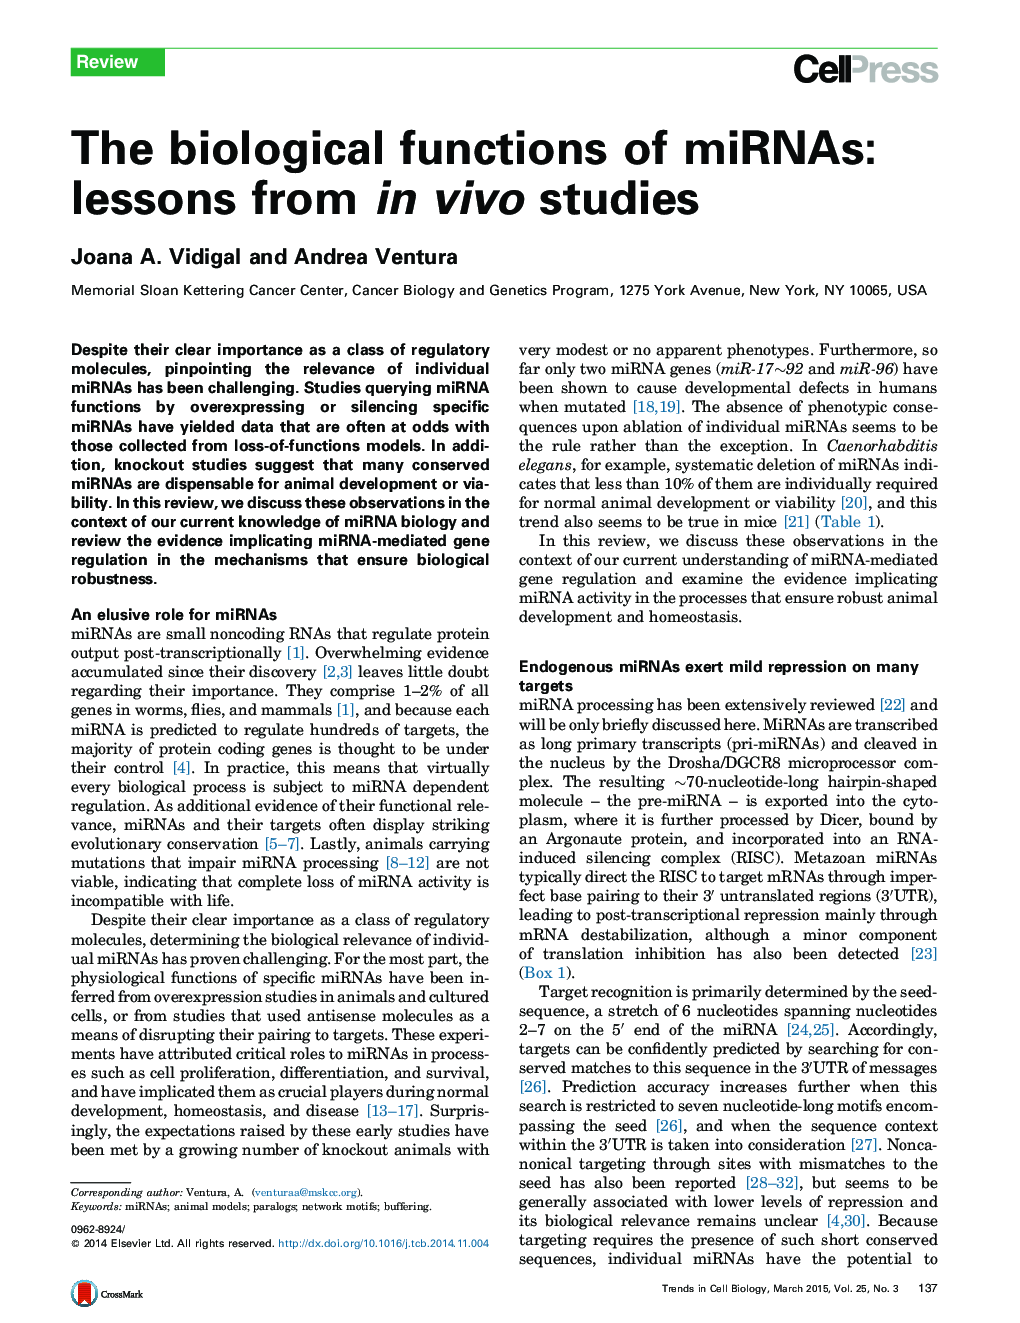 The biological functions of miRNAs: lessons from in vivo studies